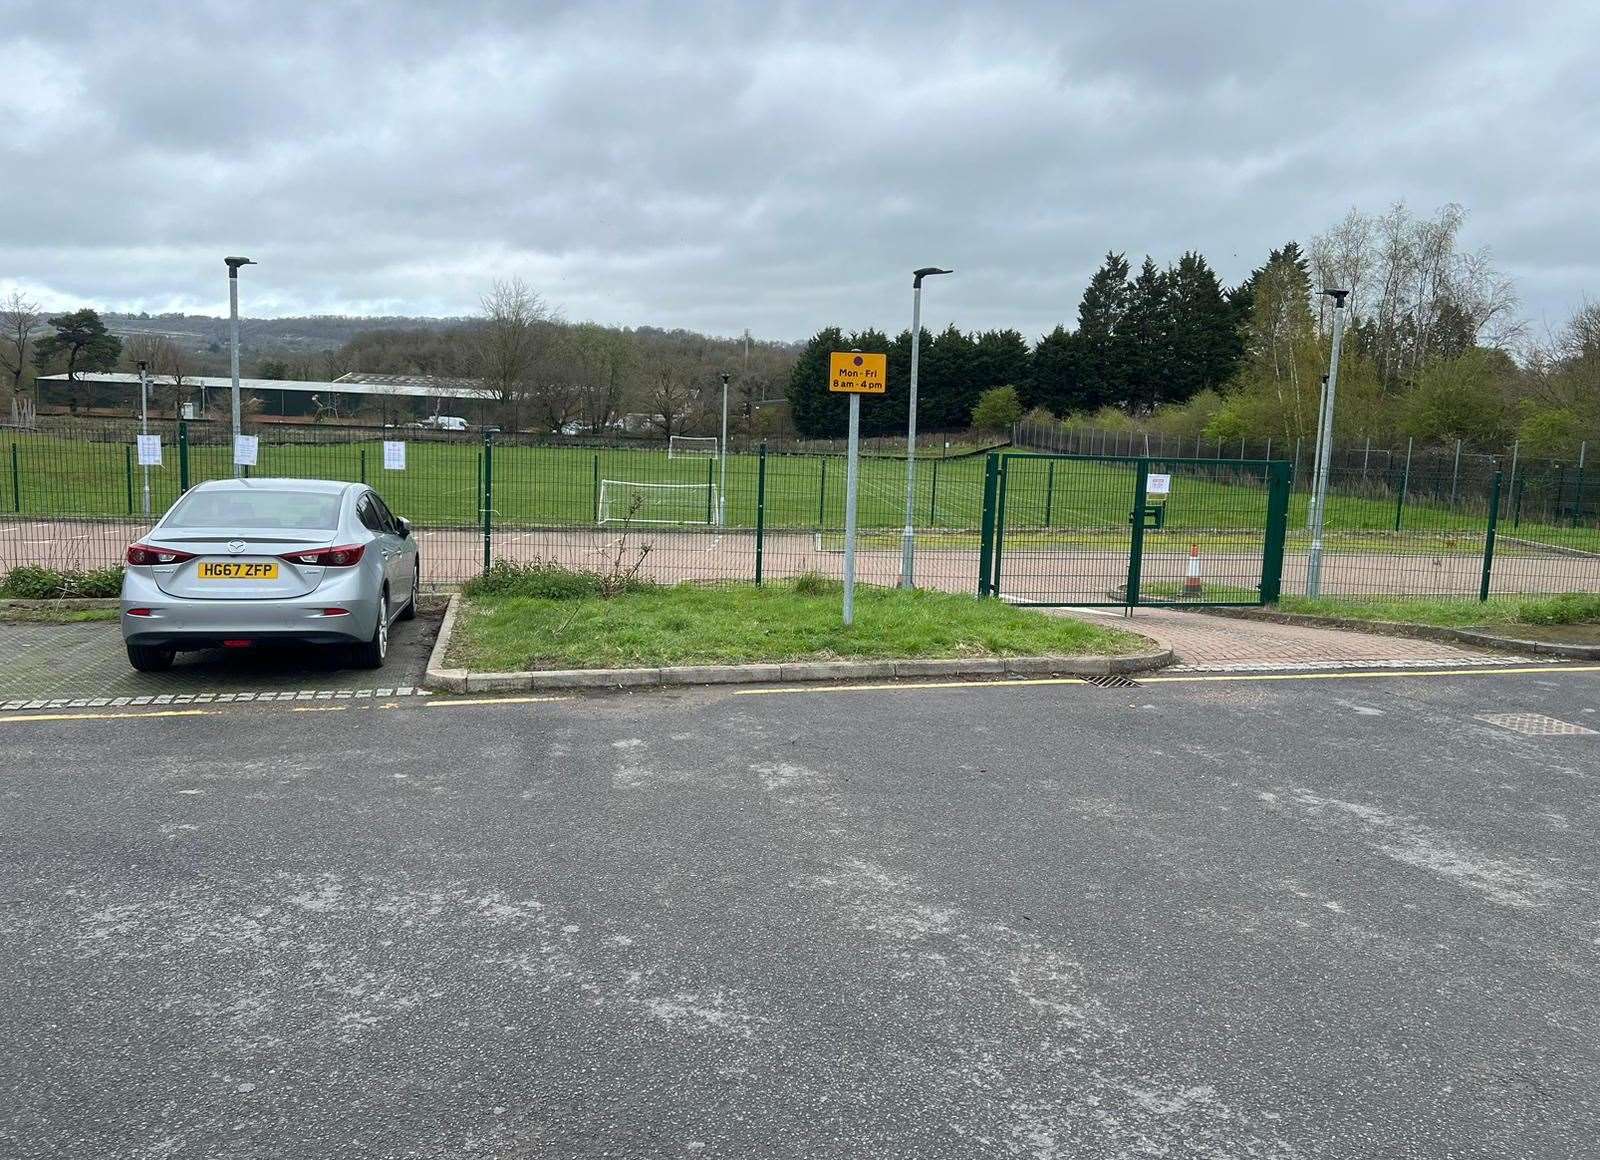 The entrance to the school's own car park at Platt Primary